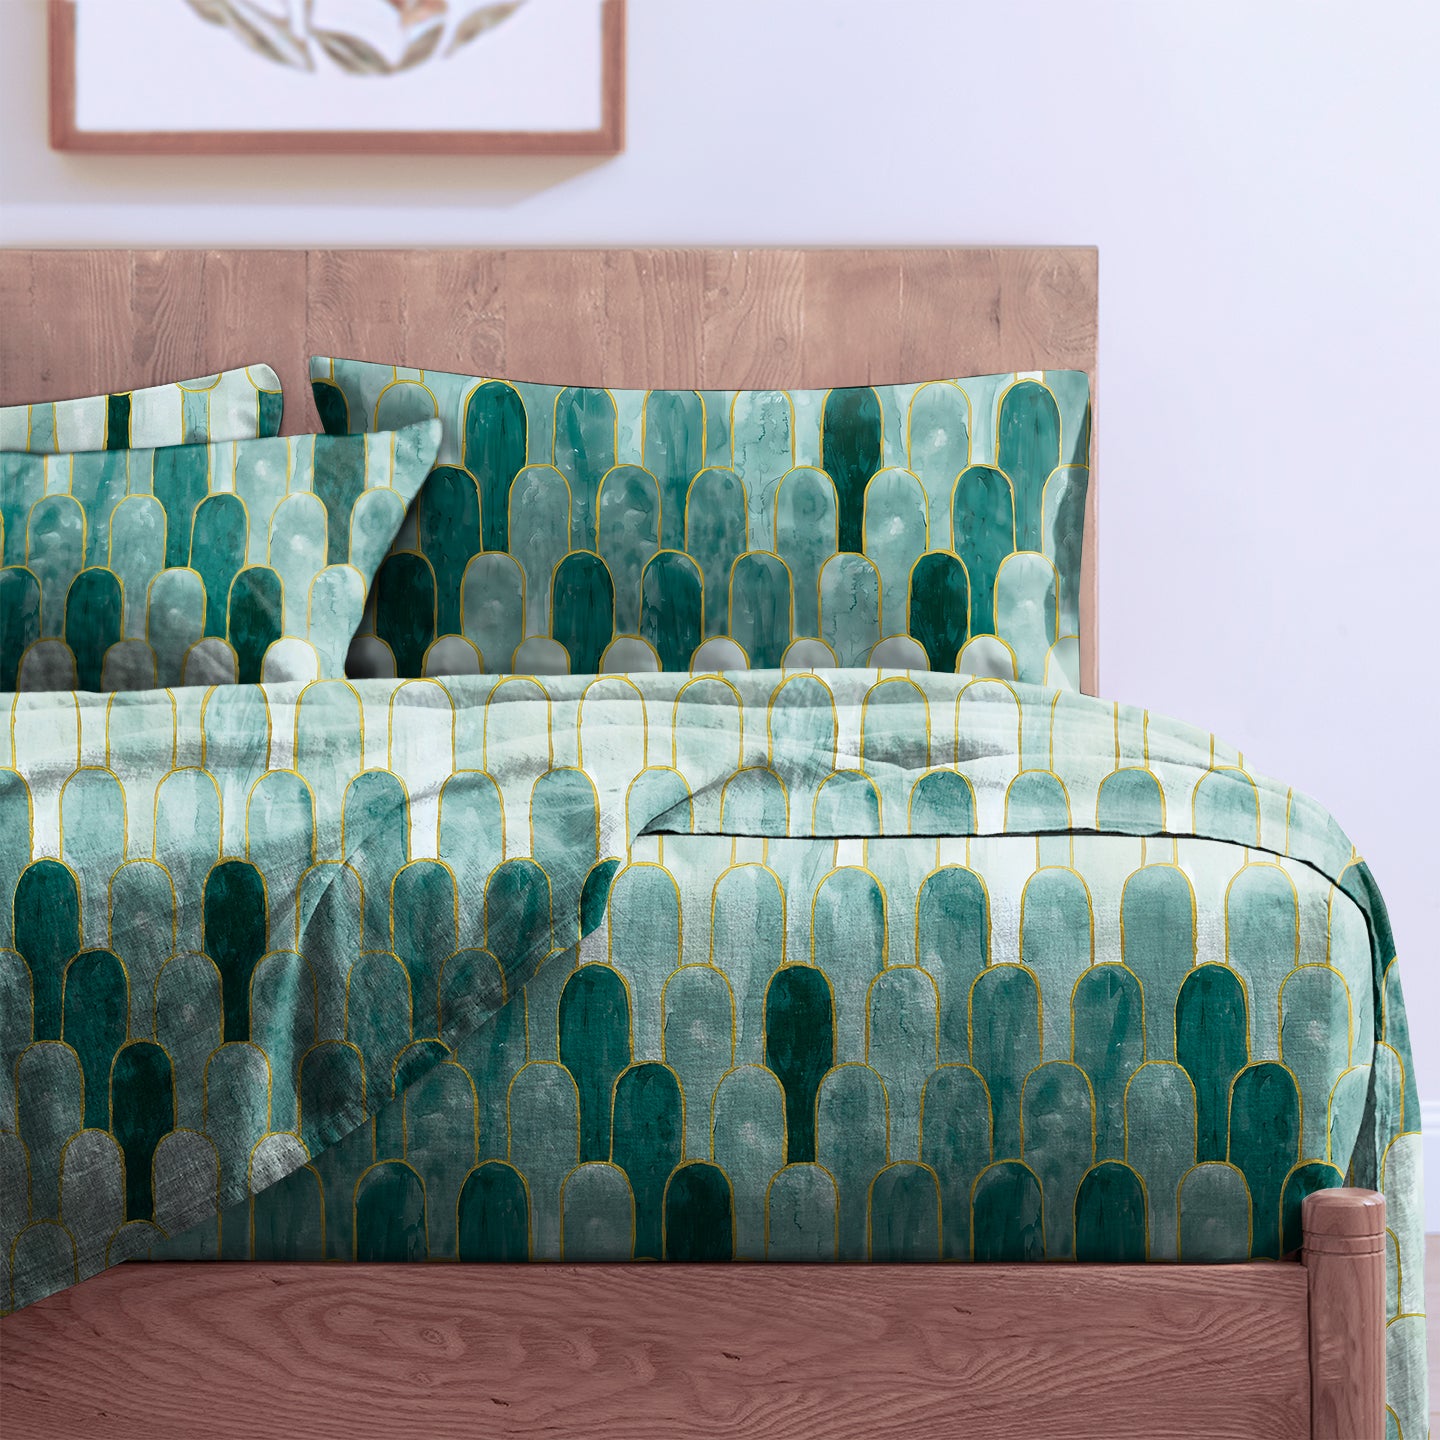 NICOBAR GREEN BEDCOVER FOR DOUBLE BED WITH 2 PILLOWCOVERS KING SIZE (104" X 90")